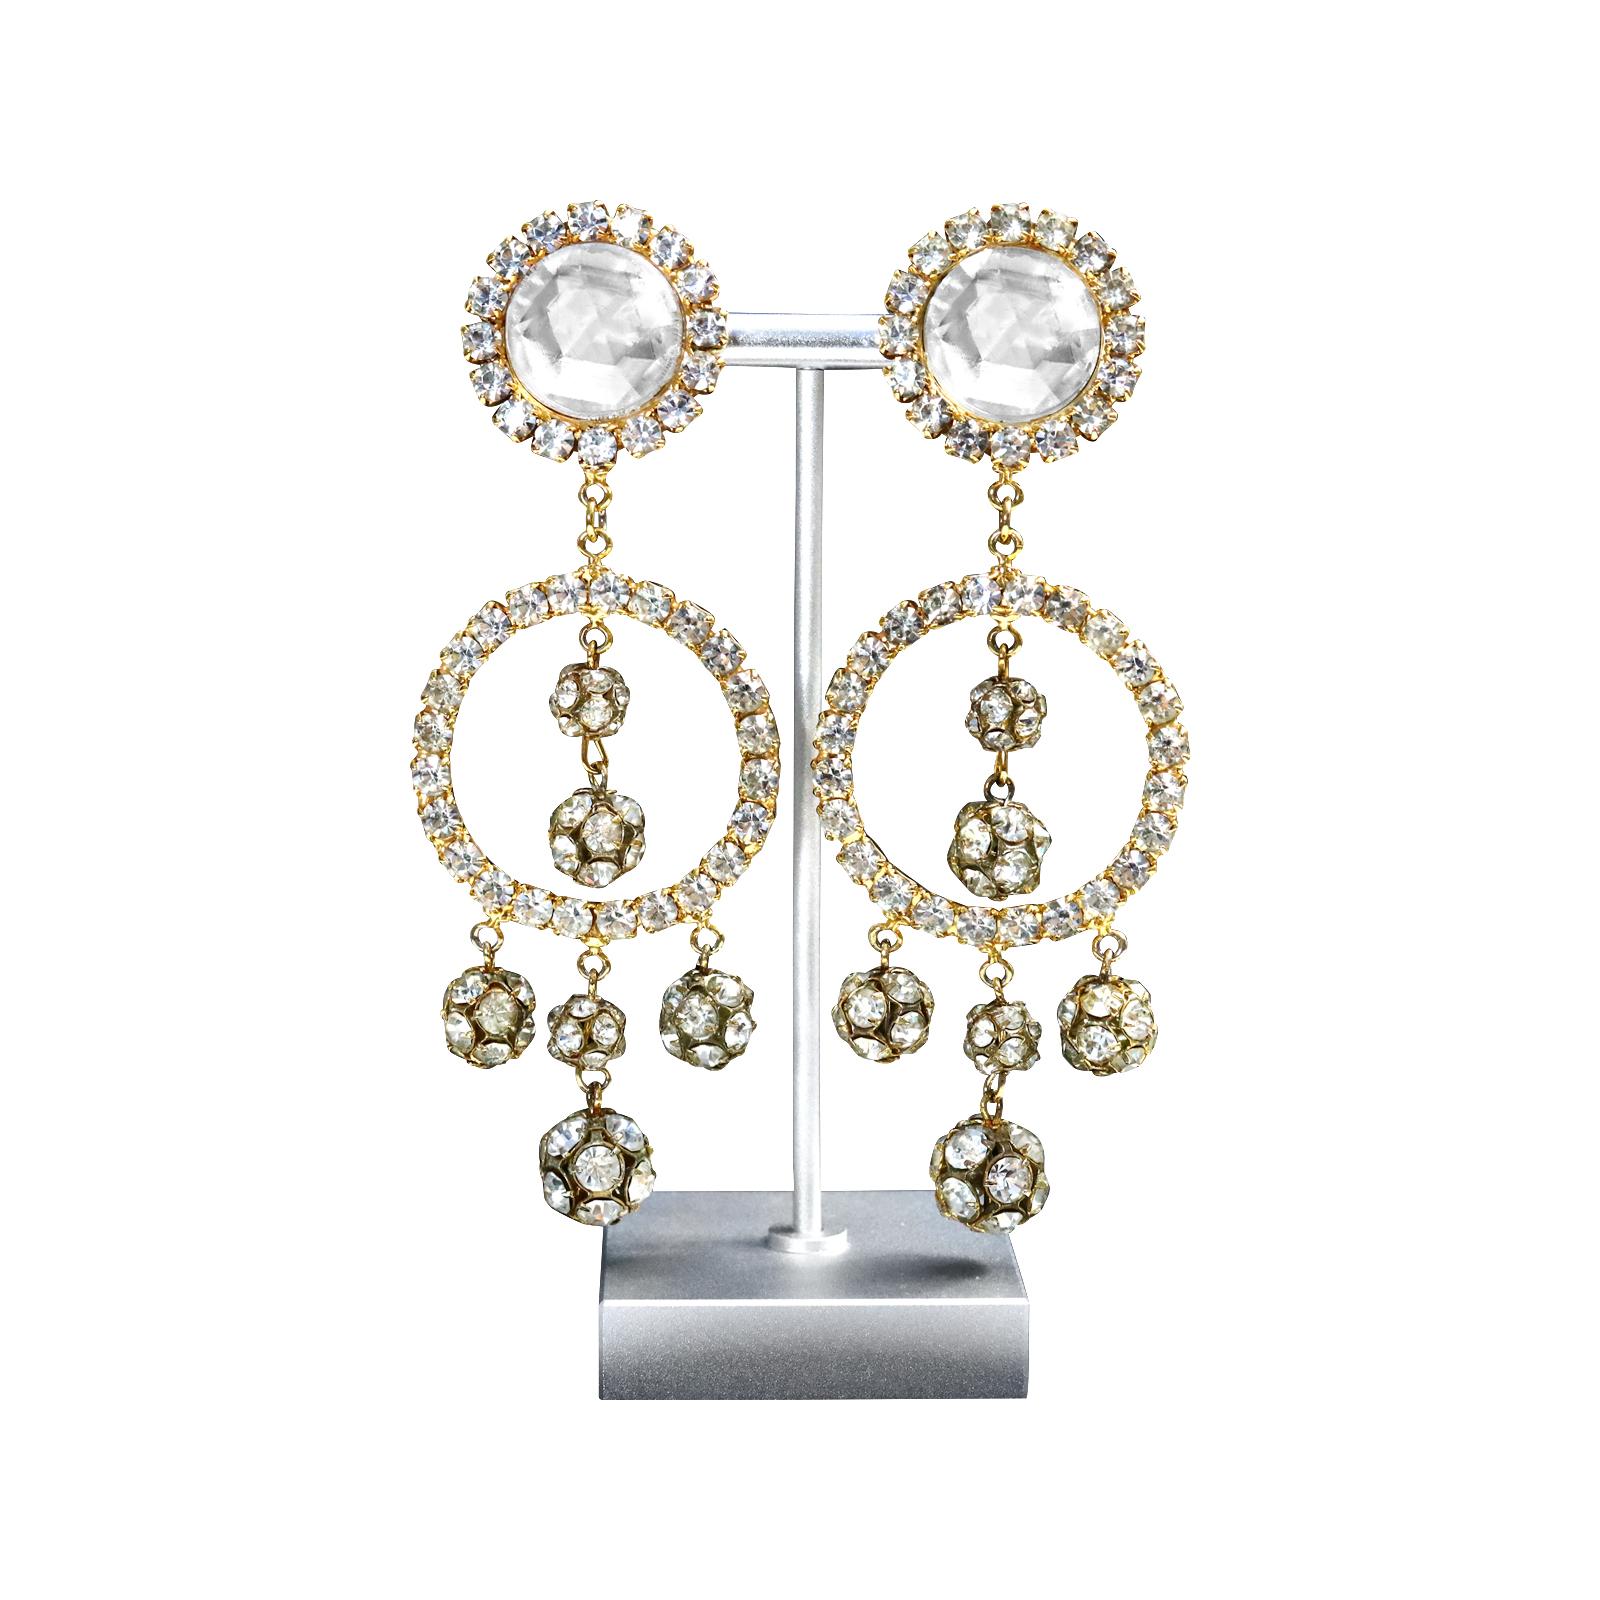 Vintage Gold Tone Diamante Long Dangling Earrings with Rondelles, Circa 1960s For Sale 1